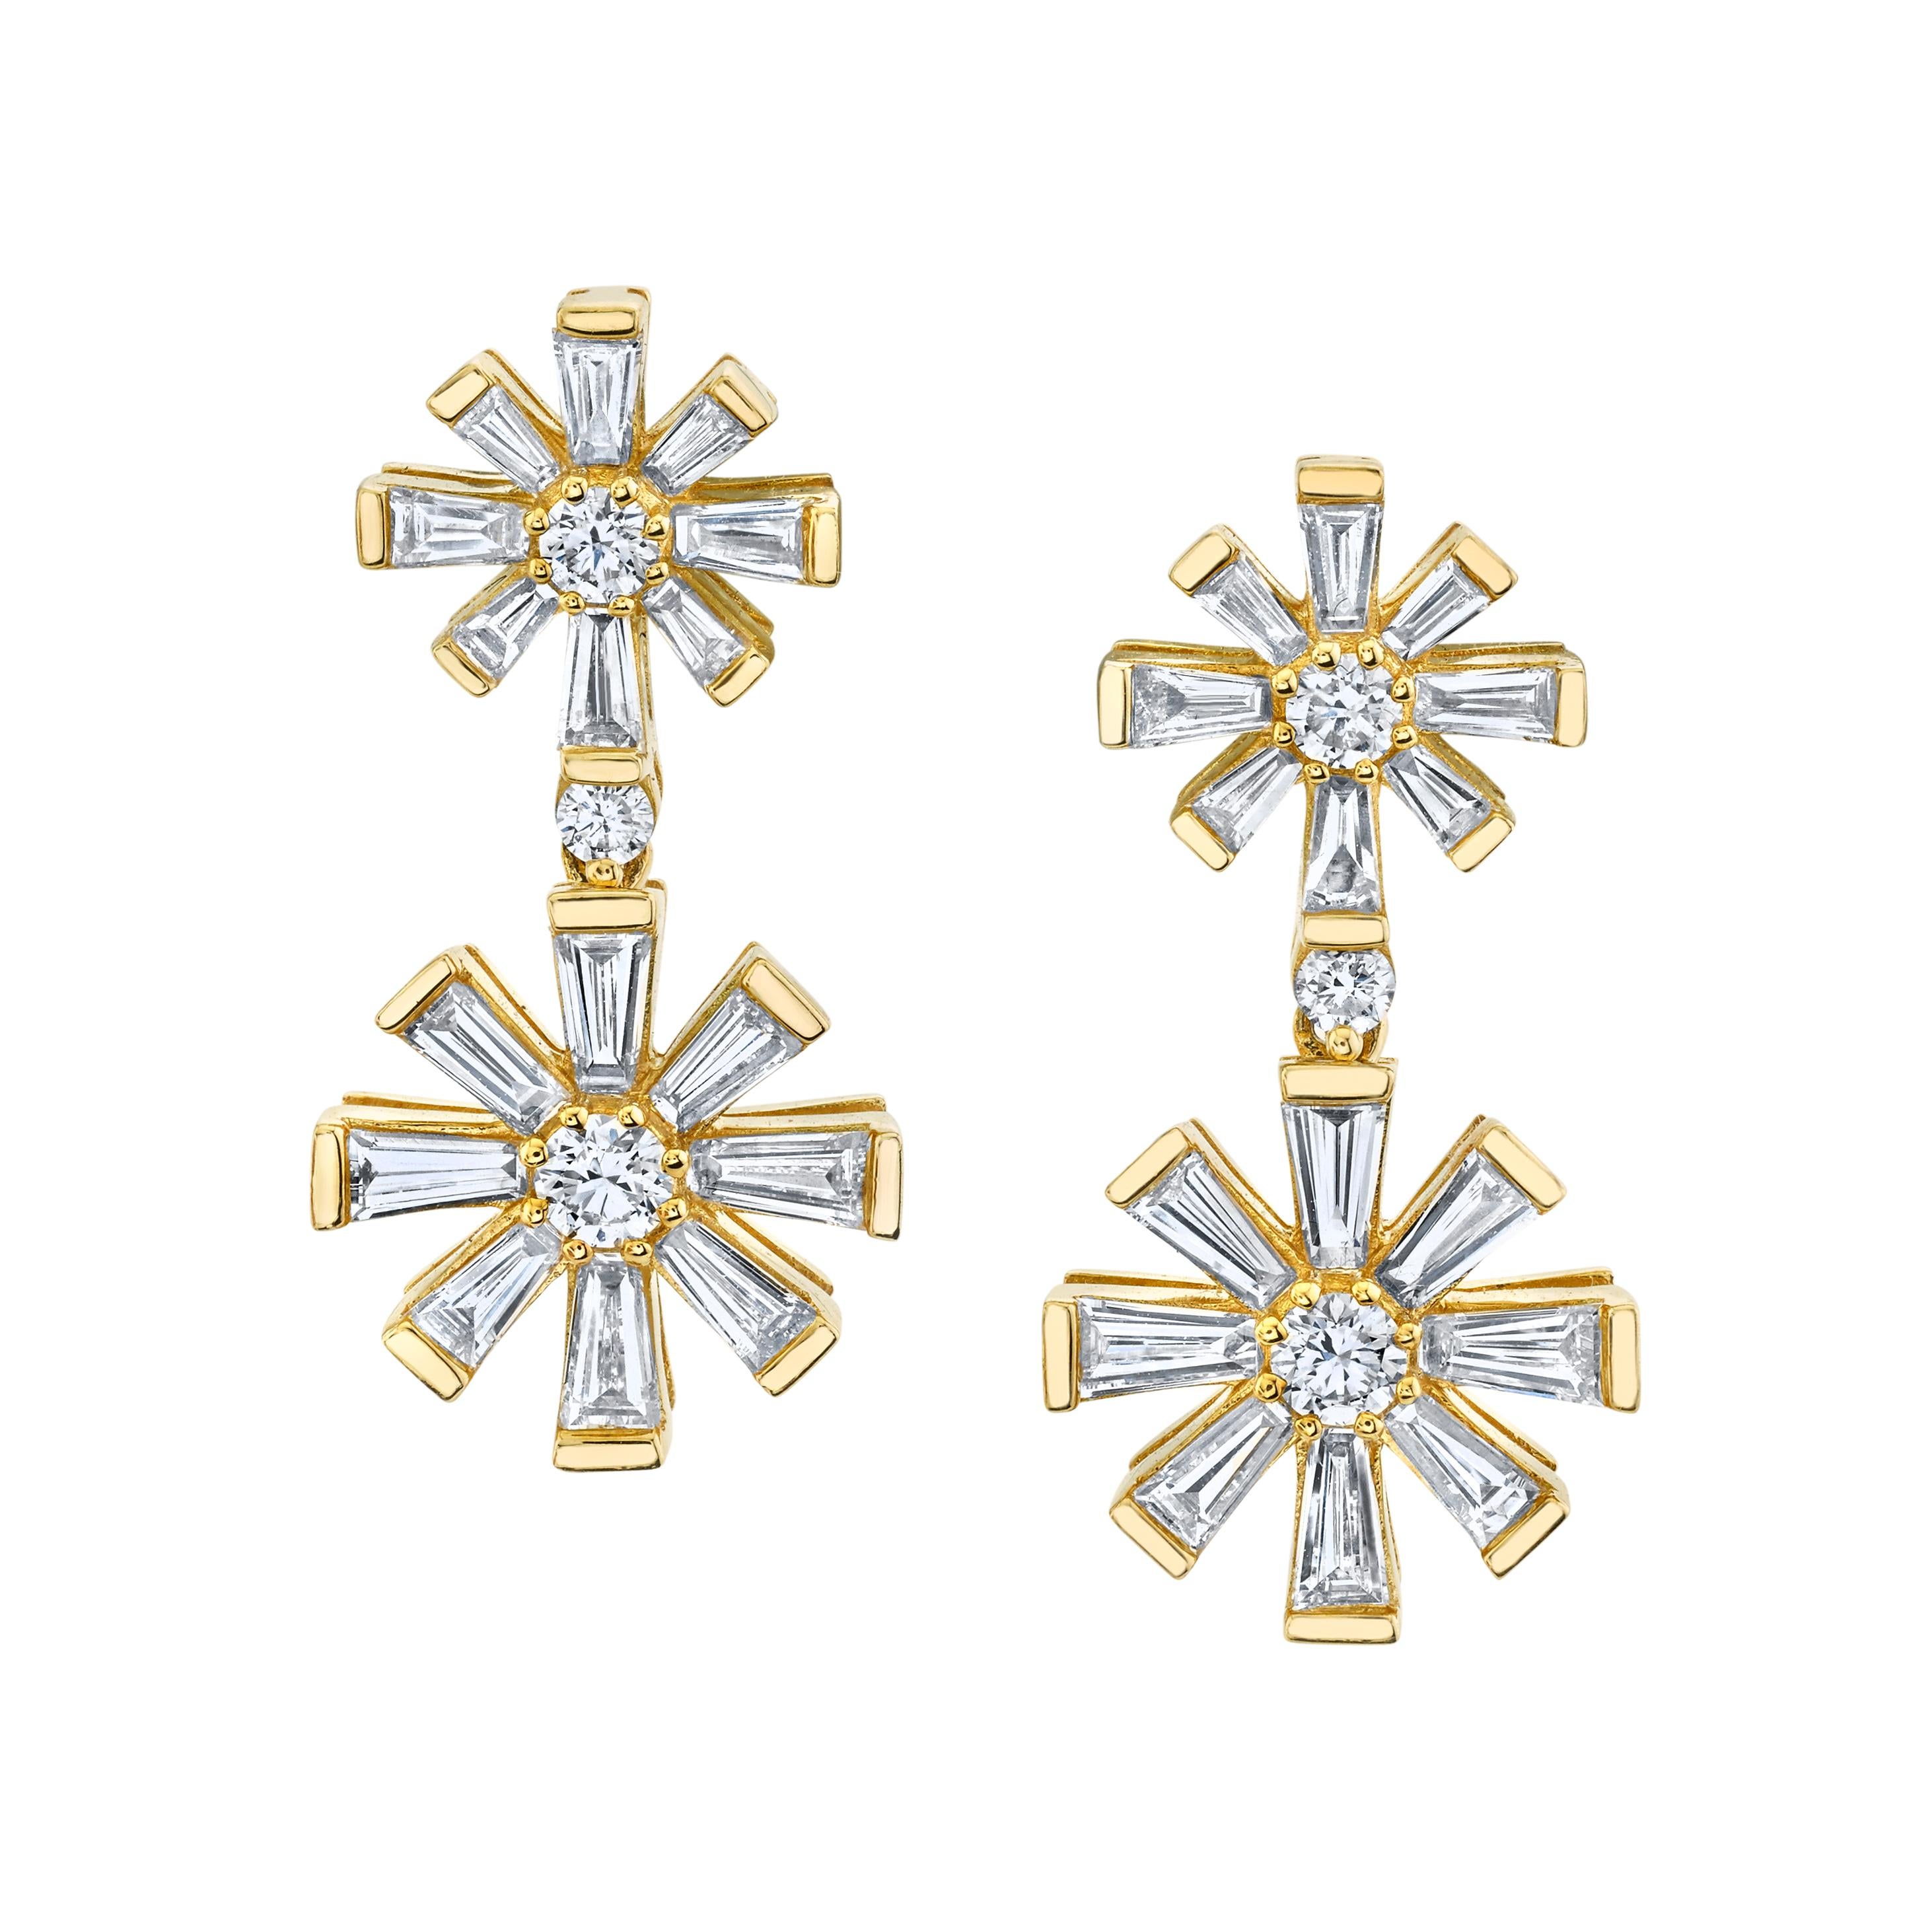 These drop earrings feature a beautiful arrangement of round and baguette cut white diamonds set in 18k yellow gold! Looking like sparkling stars or even snowflakes, they are sure to put you in the mood to celebrate. Crafted in 18k yellow gold by